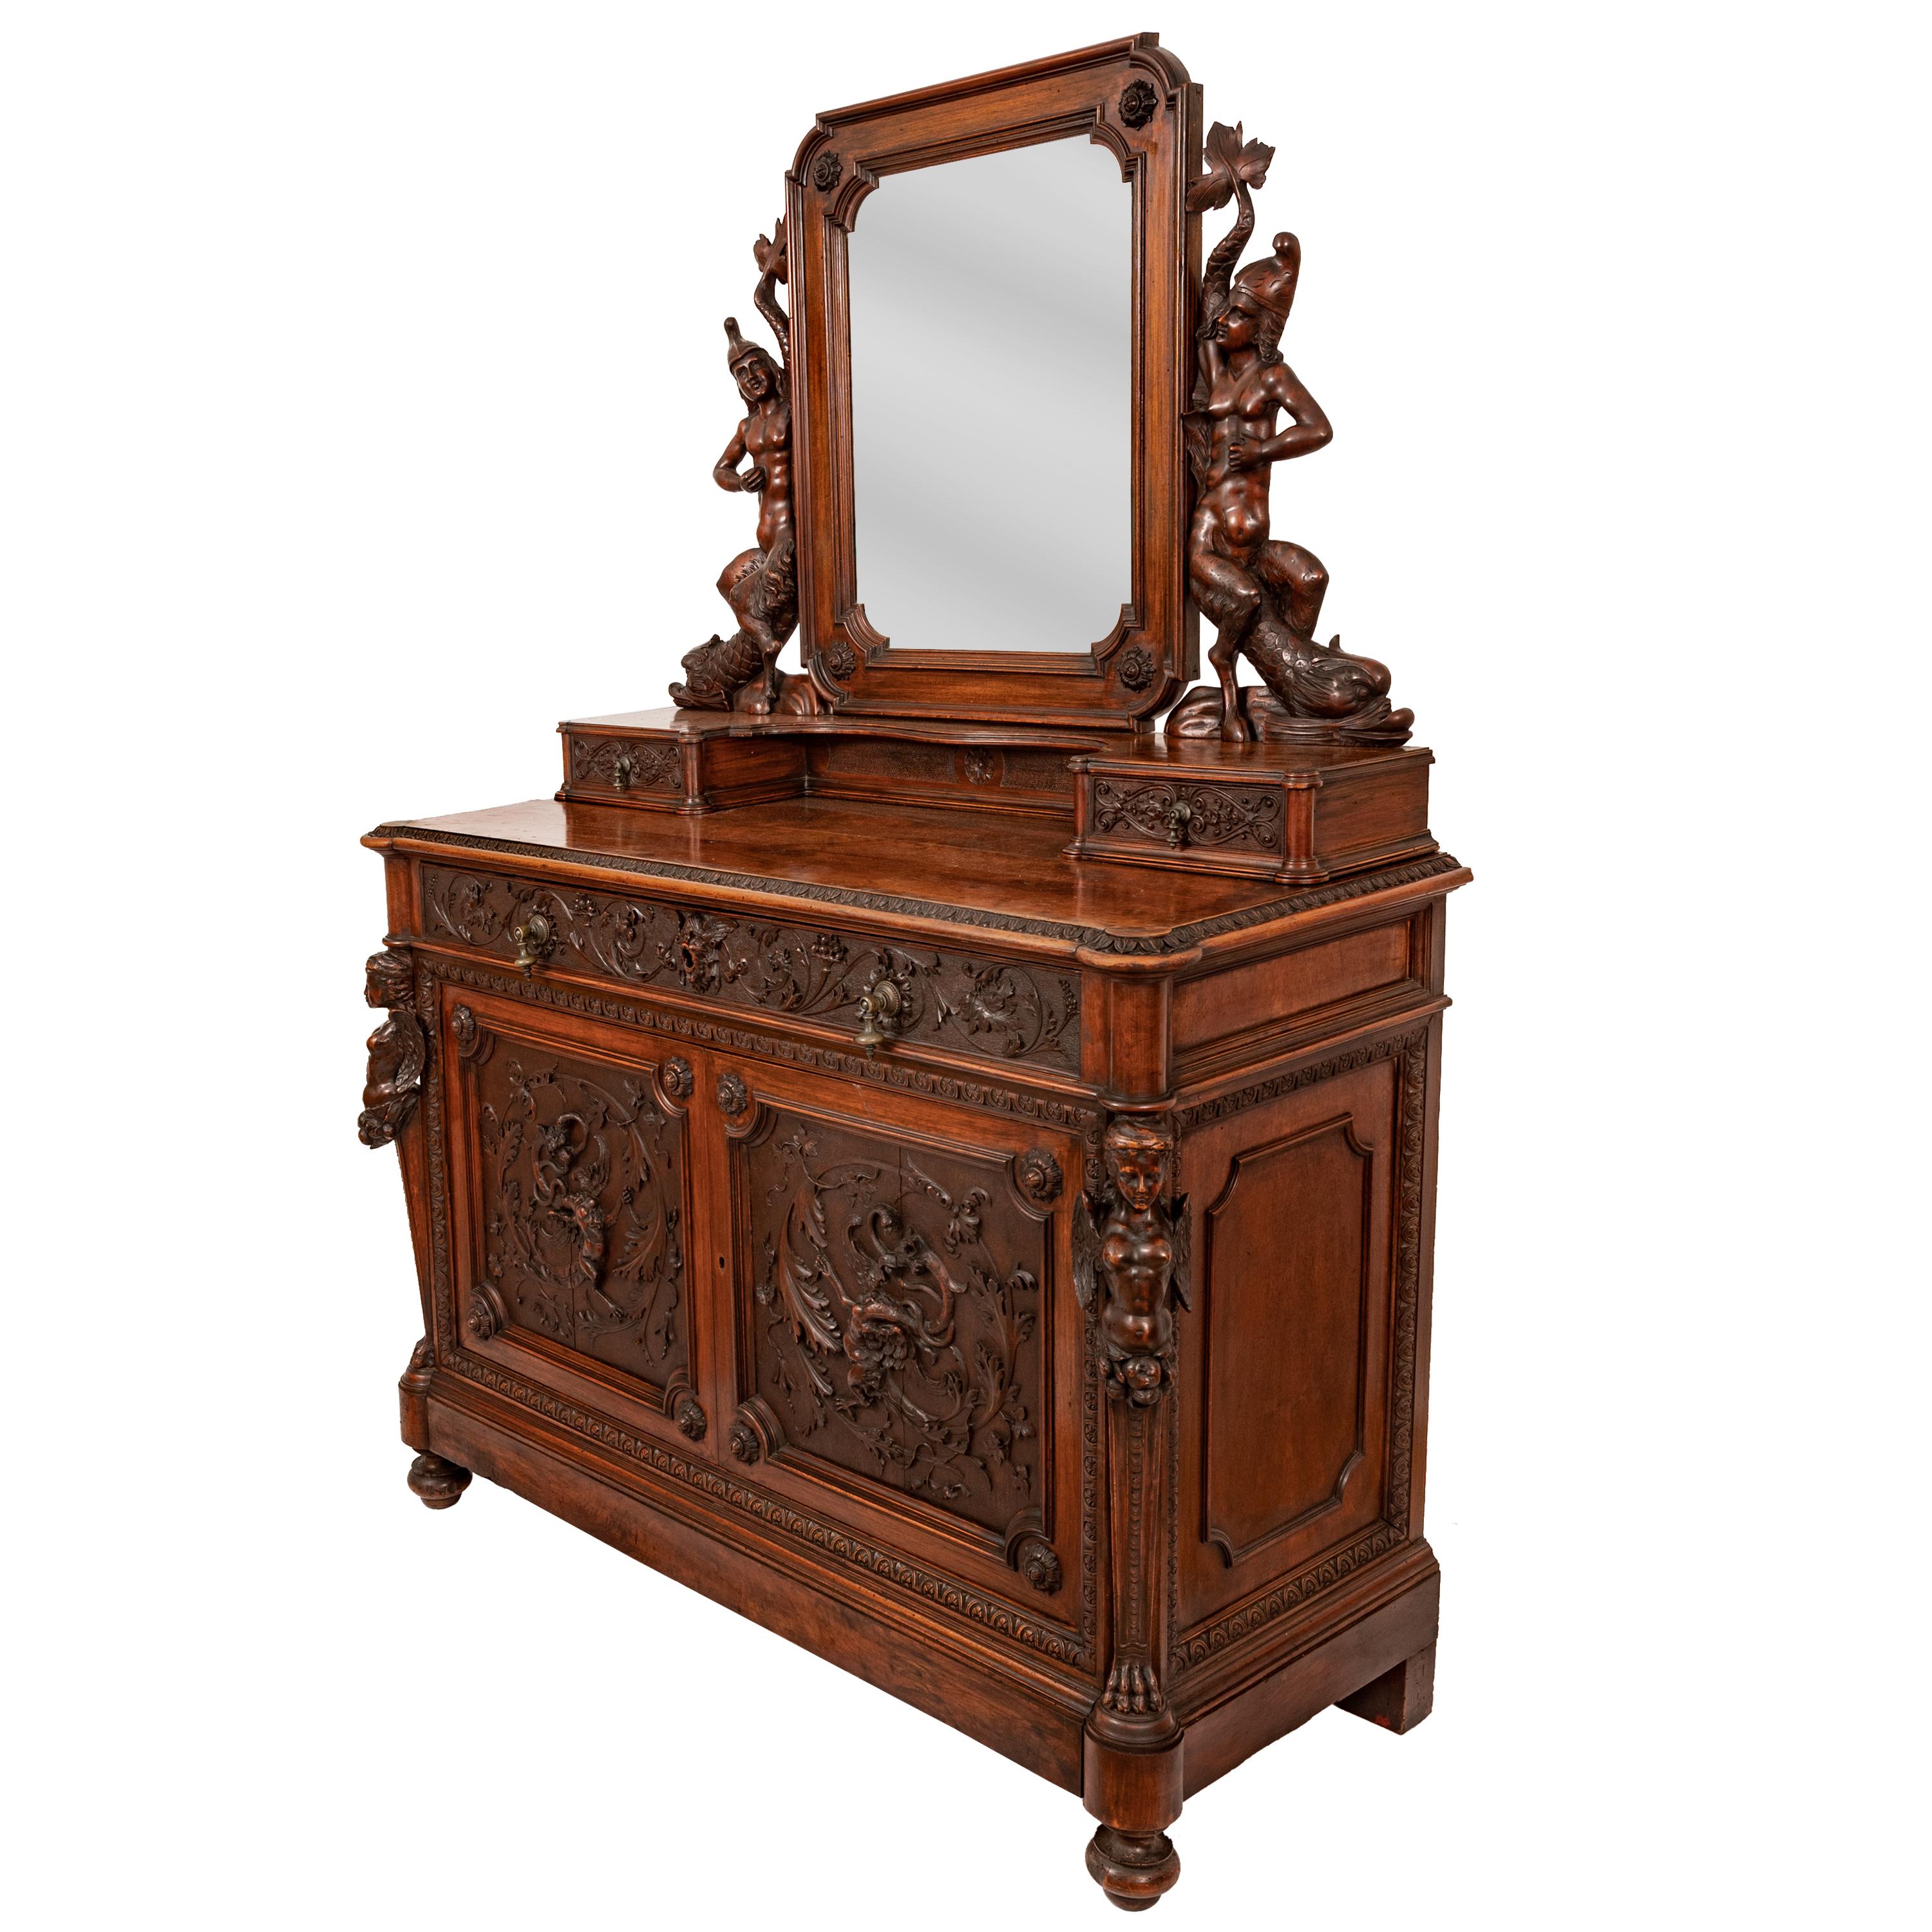 A superbly carved antique Italian Renaissance Revival mirror back dressing chest, circa 1870.
The dresser extols the art of the Italian carver at his very finest, the adjustable mirror back supported with two carved mermaids with horses hooves and